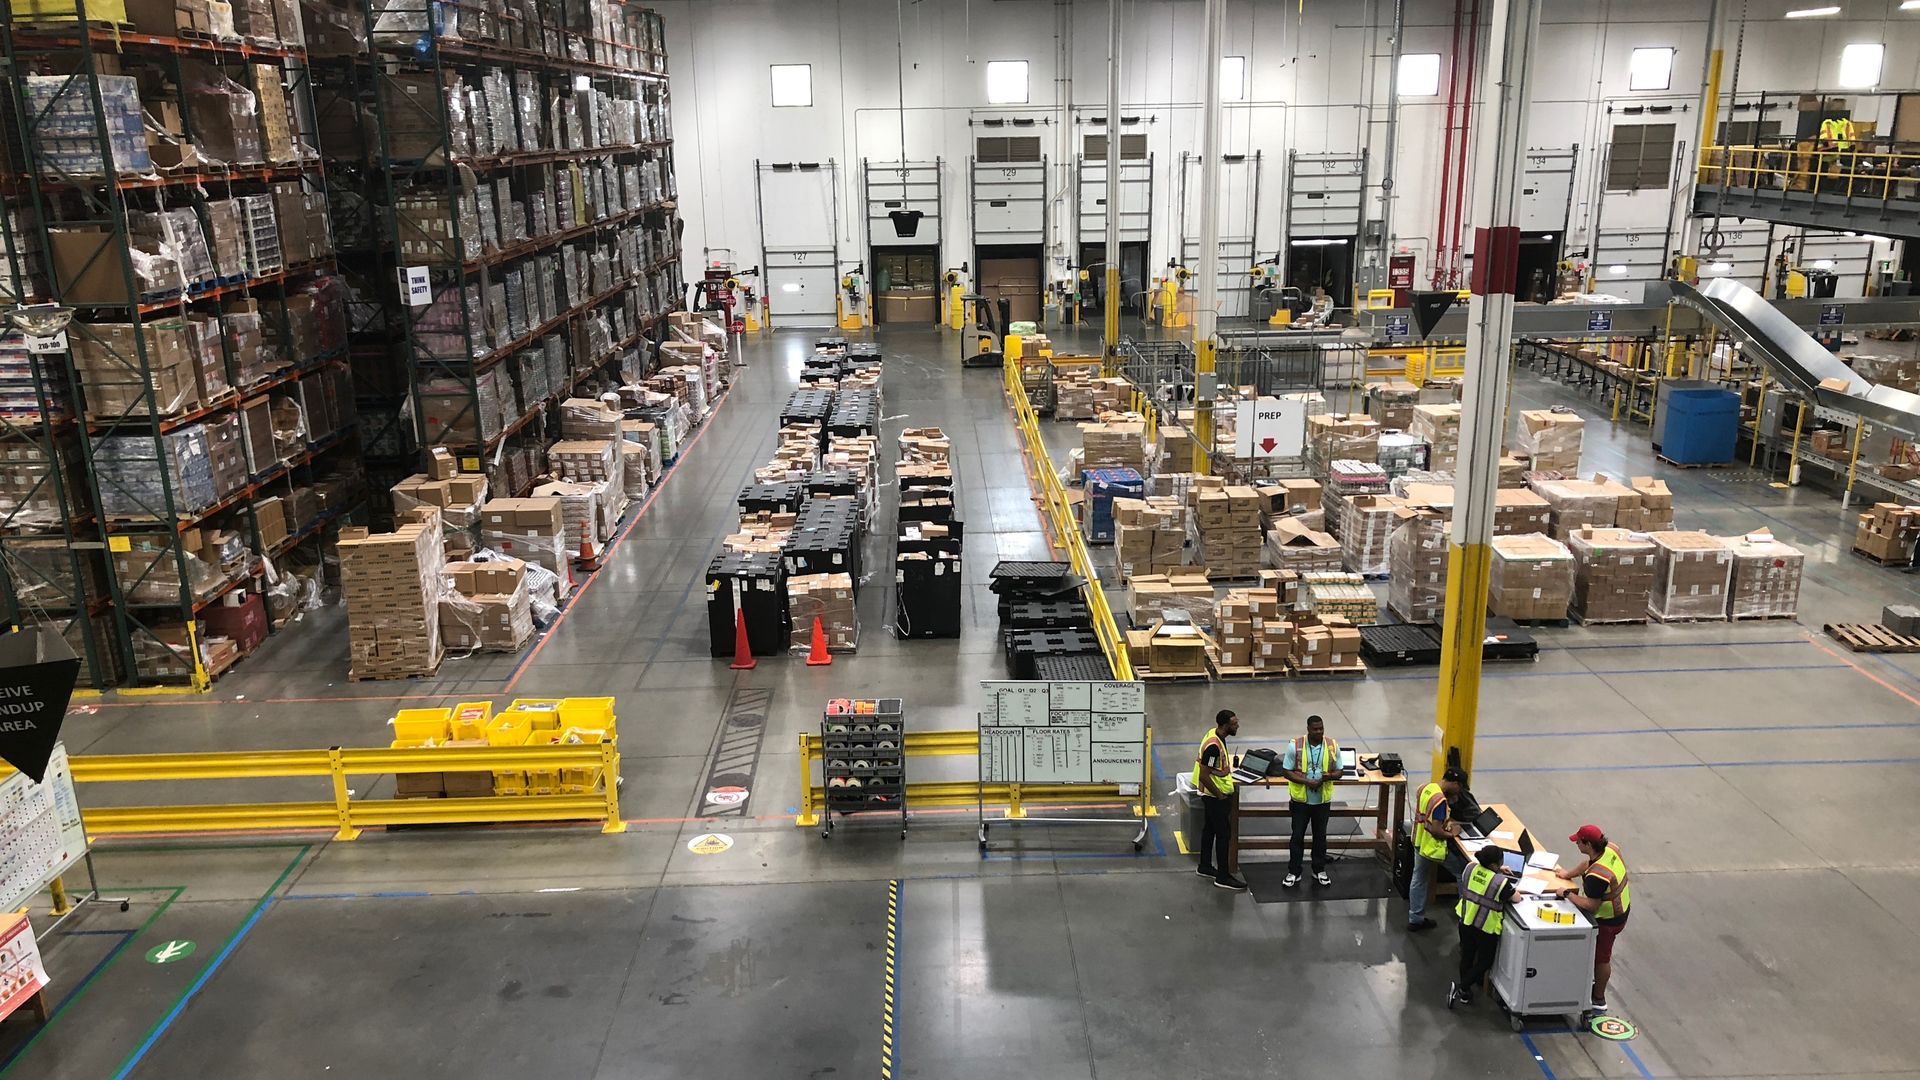 A bird's eye view of a warehouse with packages stacked high